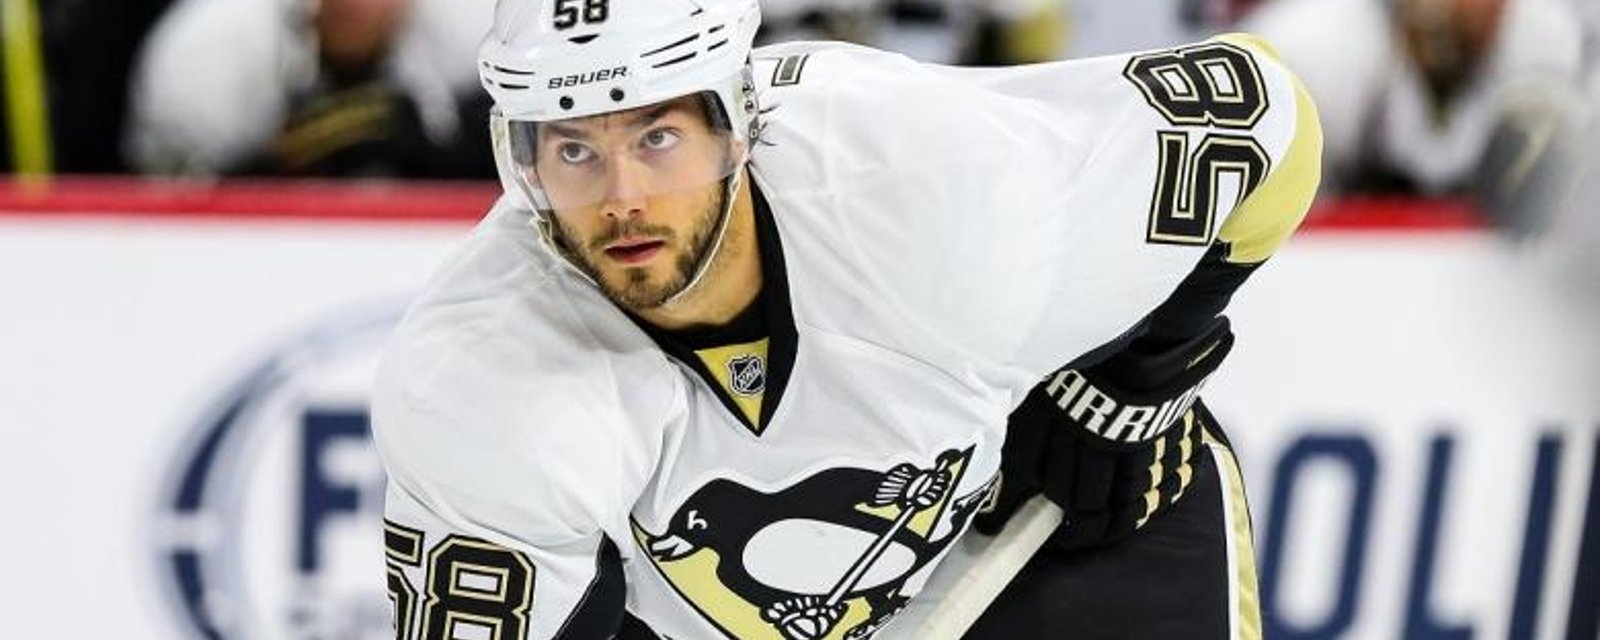 Kris Letang shaken up after being hit along the boards.